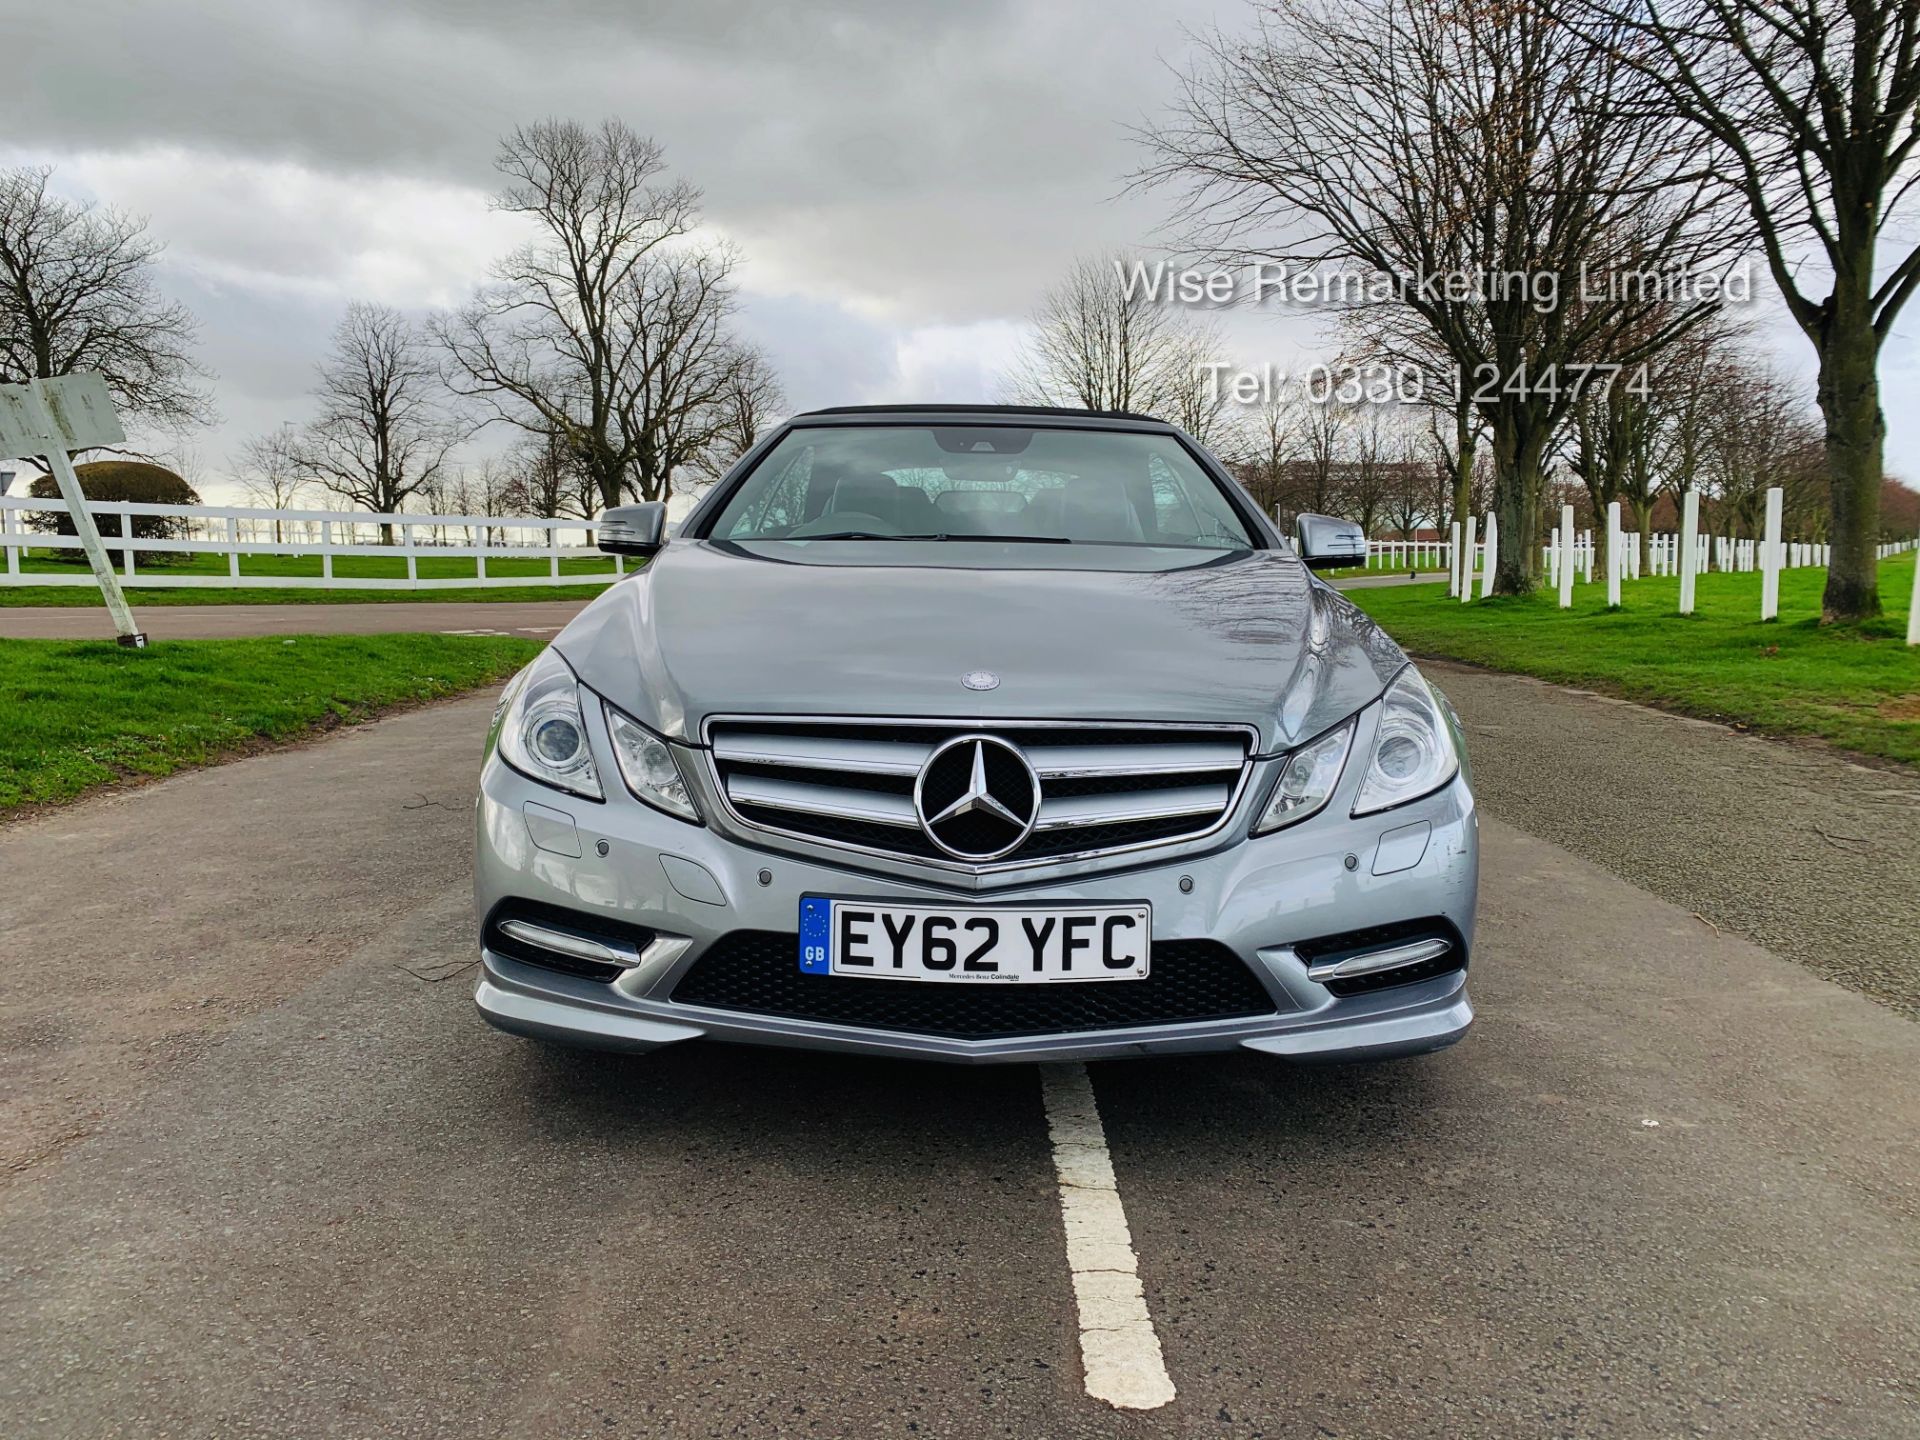 Mercedes E250 CDI Convertible Sport Tip Auto - 2013 Model - Service History - Leather - Parking aid - Image 2 of 27